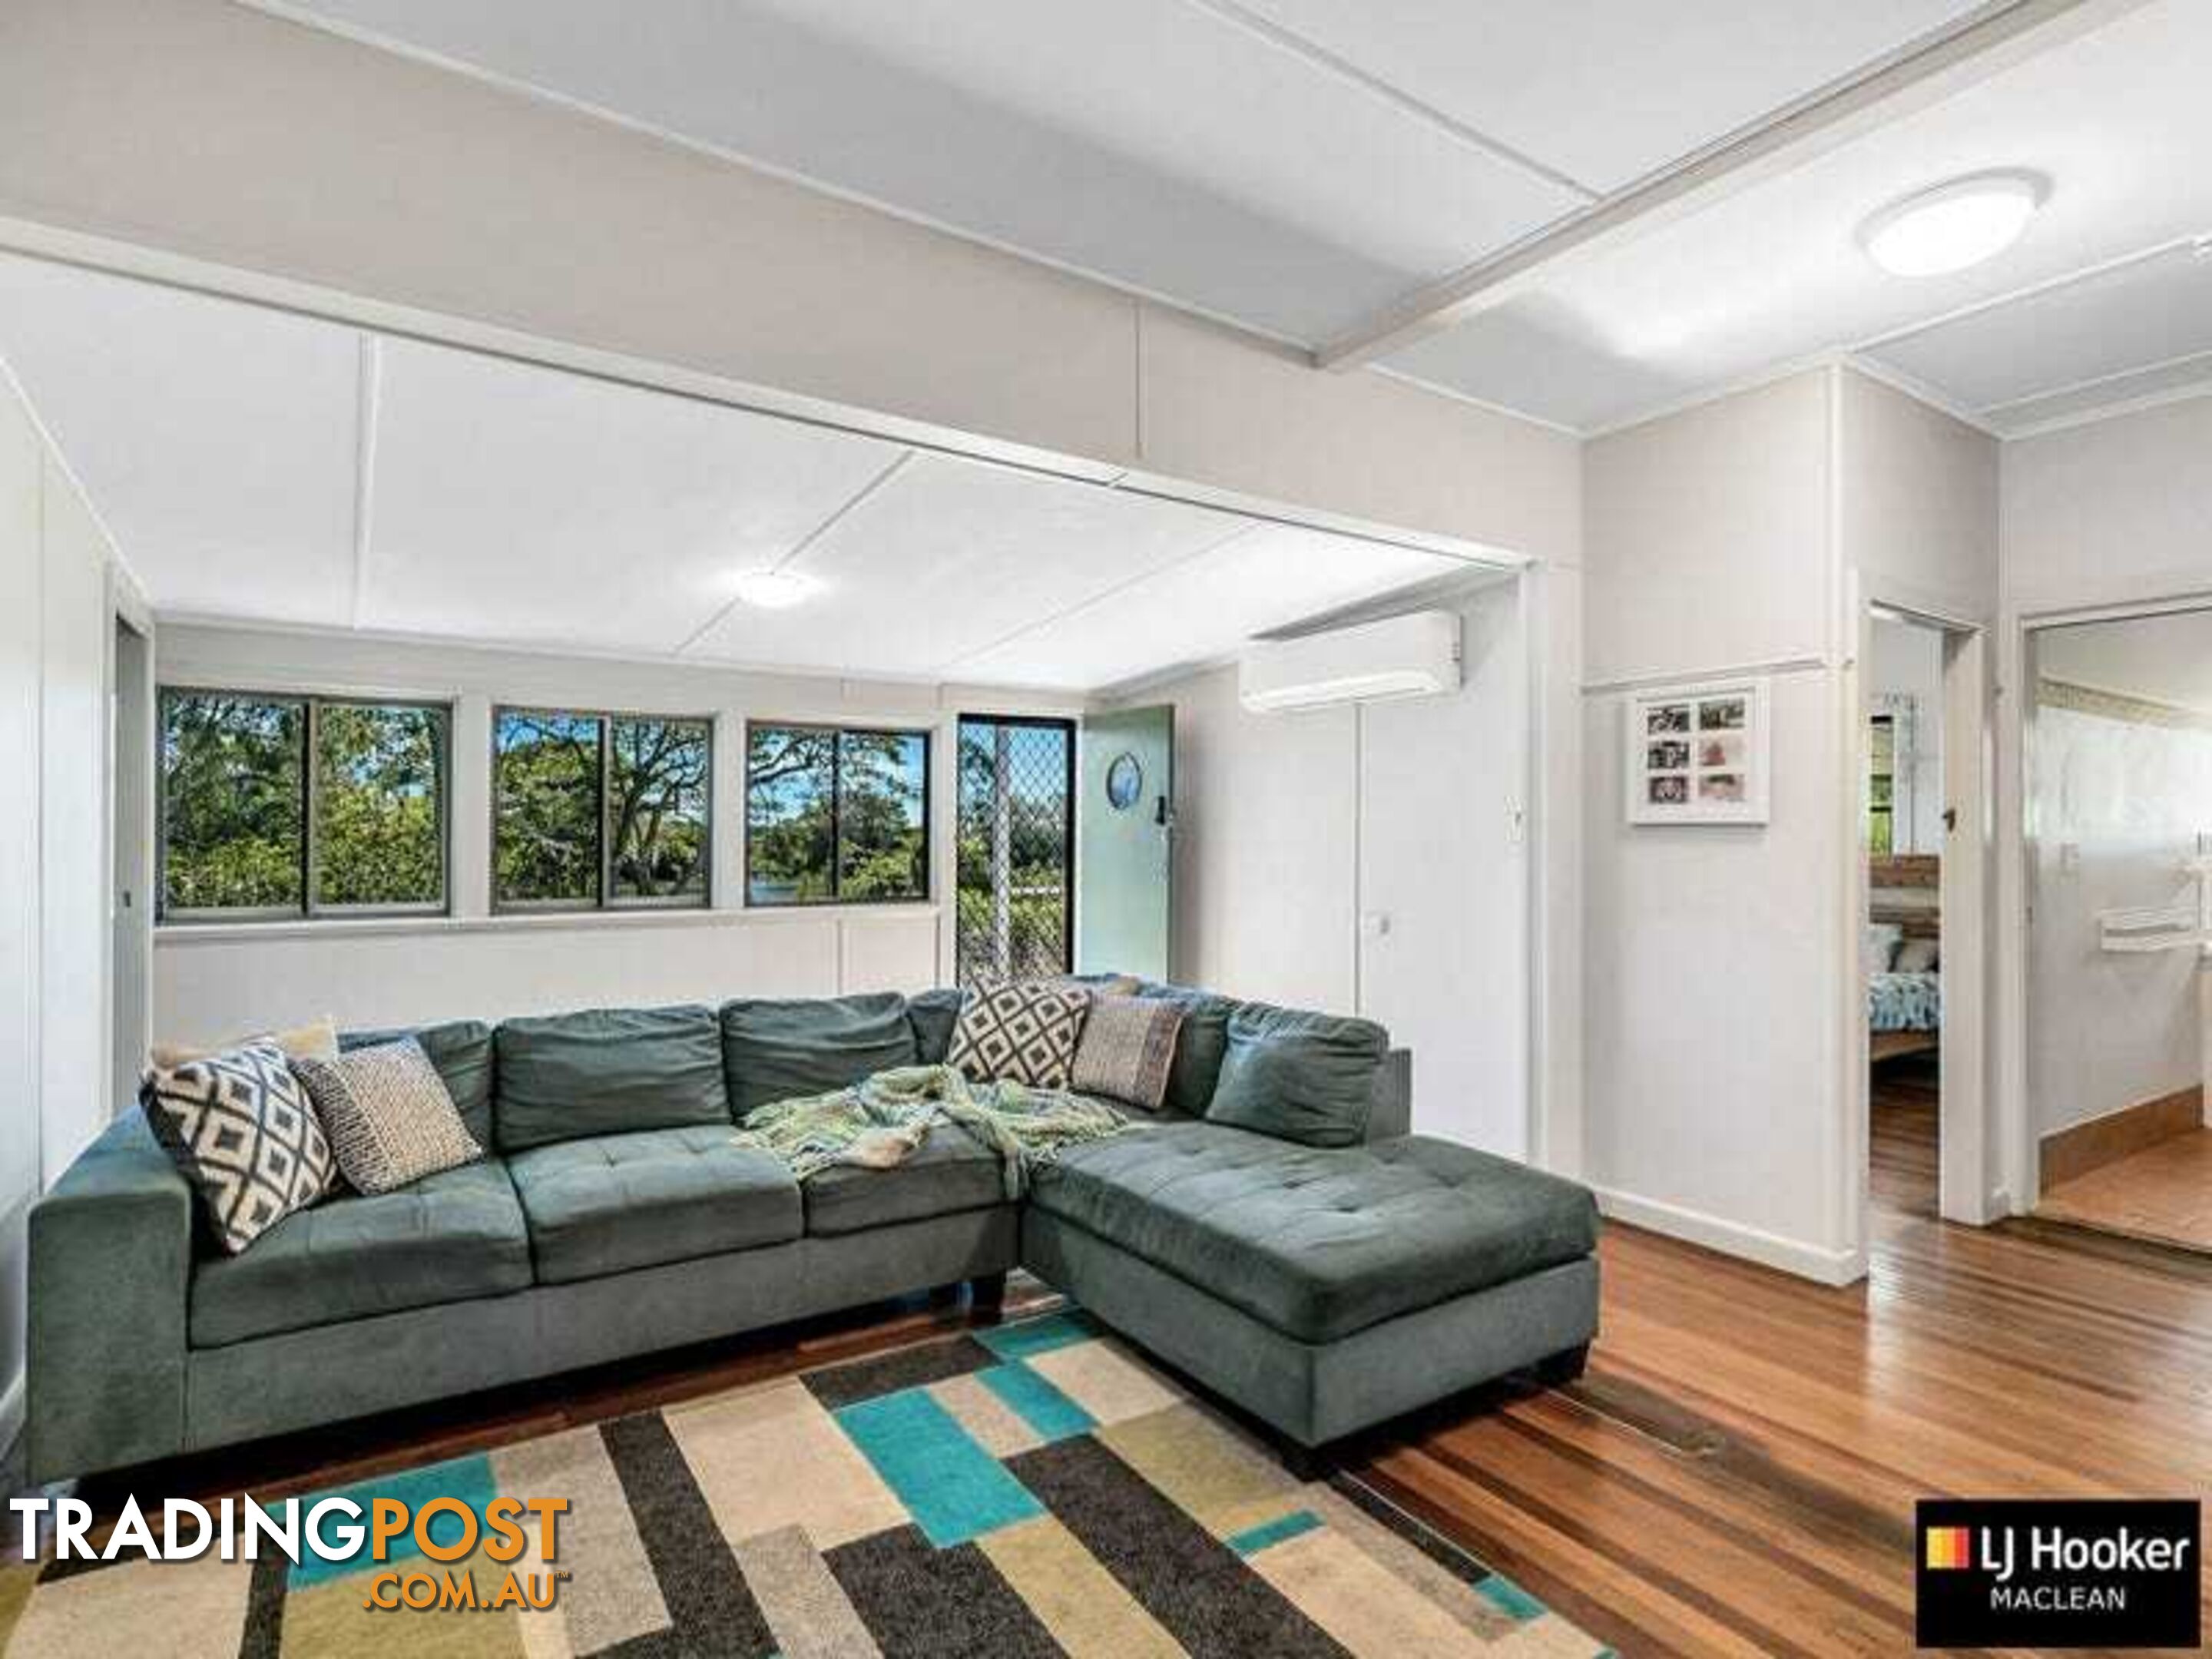 282 Serpentine Channel South Bank Road HARWOOD NSW 2465